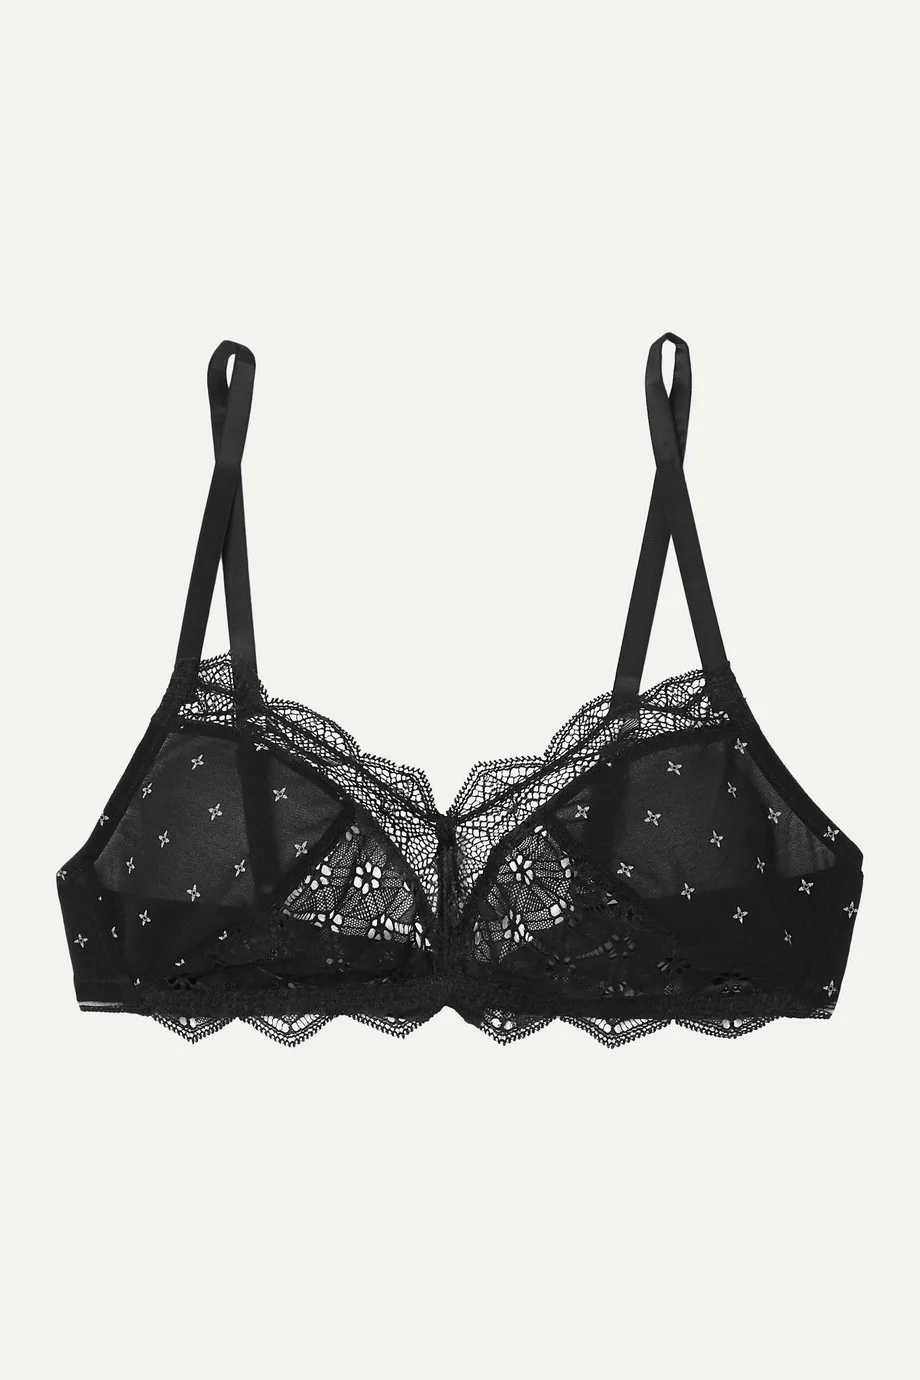 Calvin Klein + Starquilt lace and printed crepe de chine soft-cup bra